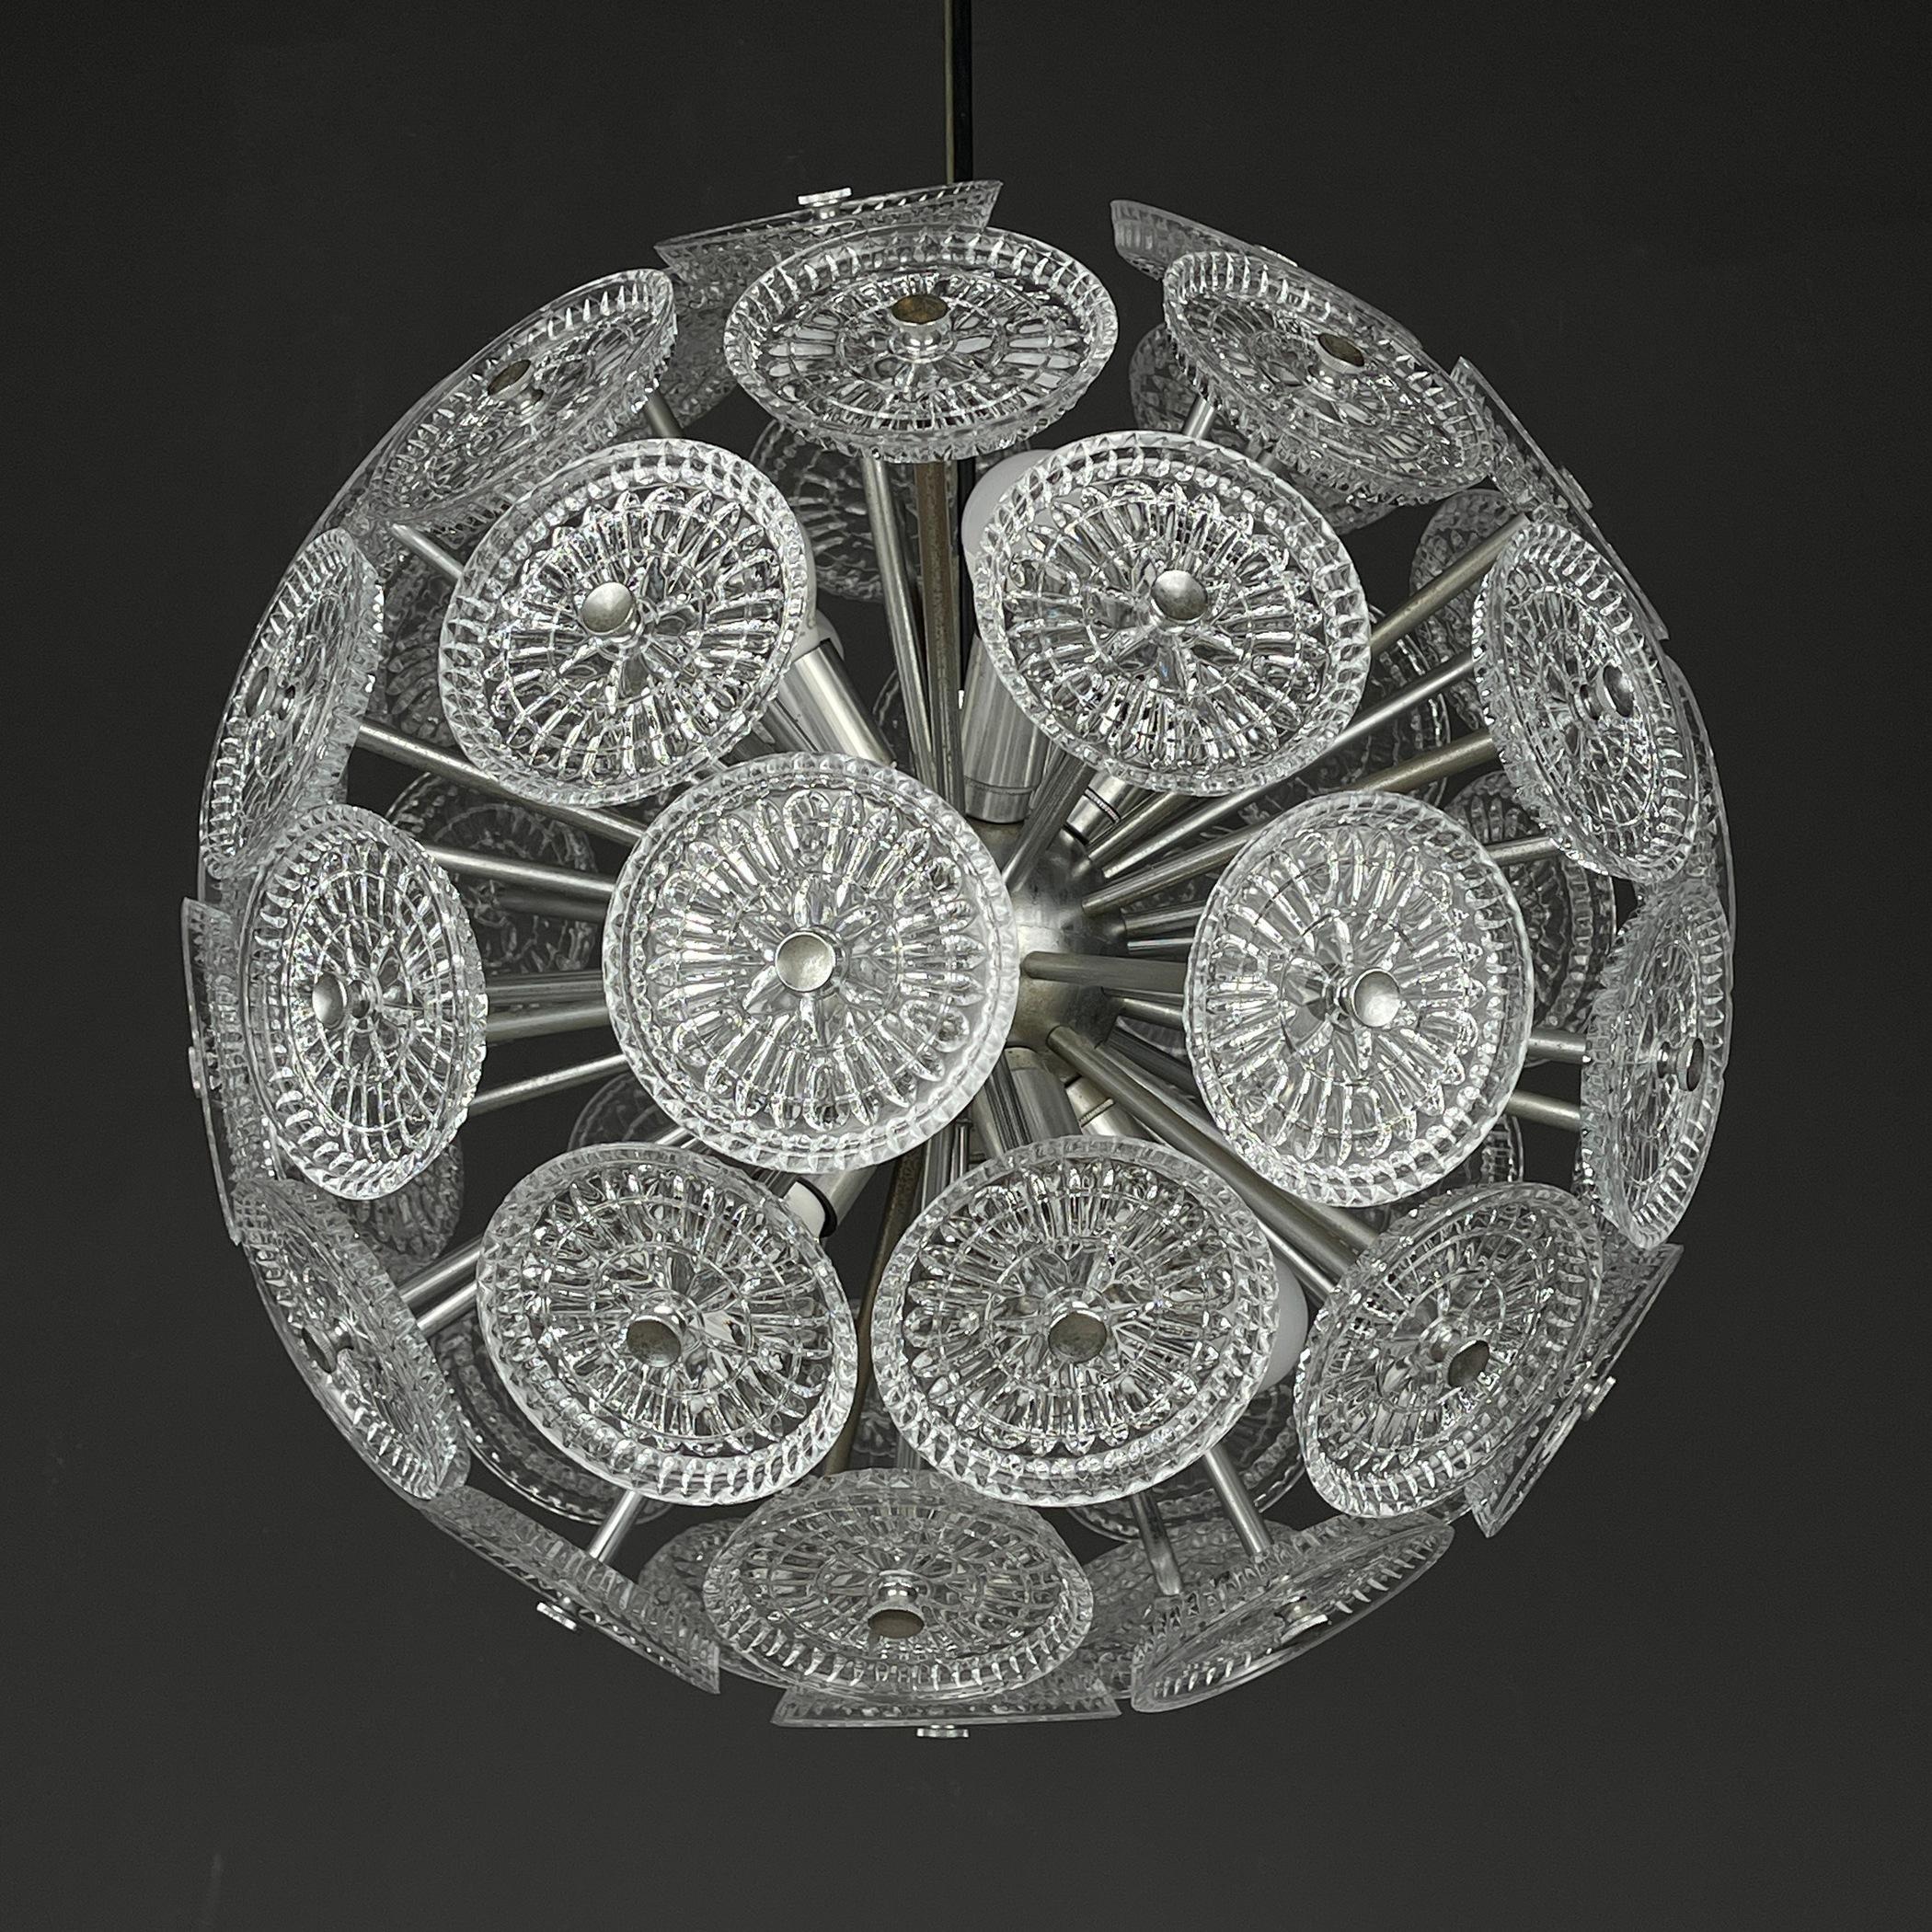 Unique vintage crystal chandelier Sputnik Dandelion made in Italy in the 1960s.
The metal base and 51 glass elements. The chandelier has a simple, clean design that makes it the perfect choice to decorate and illuminate any room of the house in a